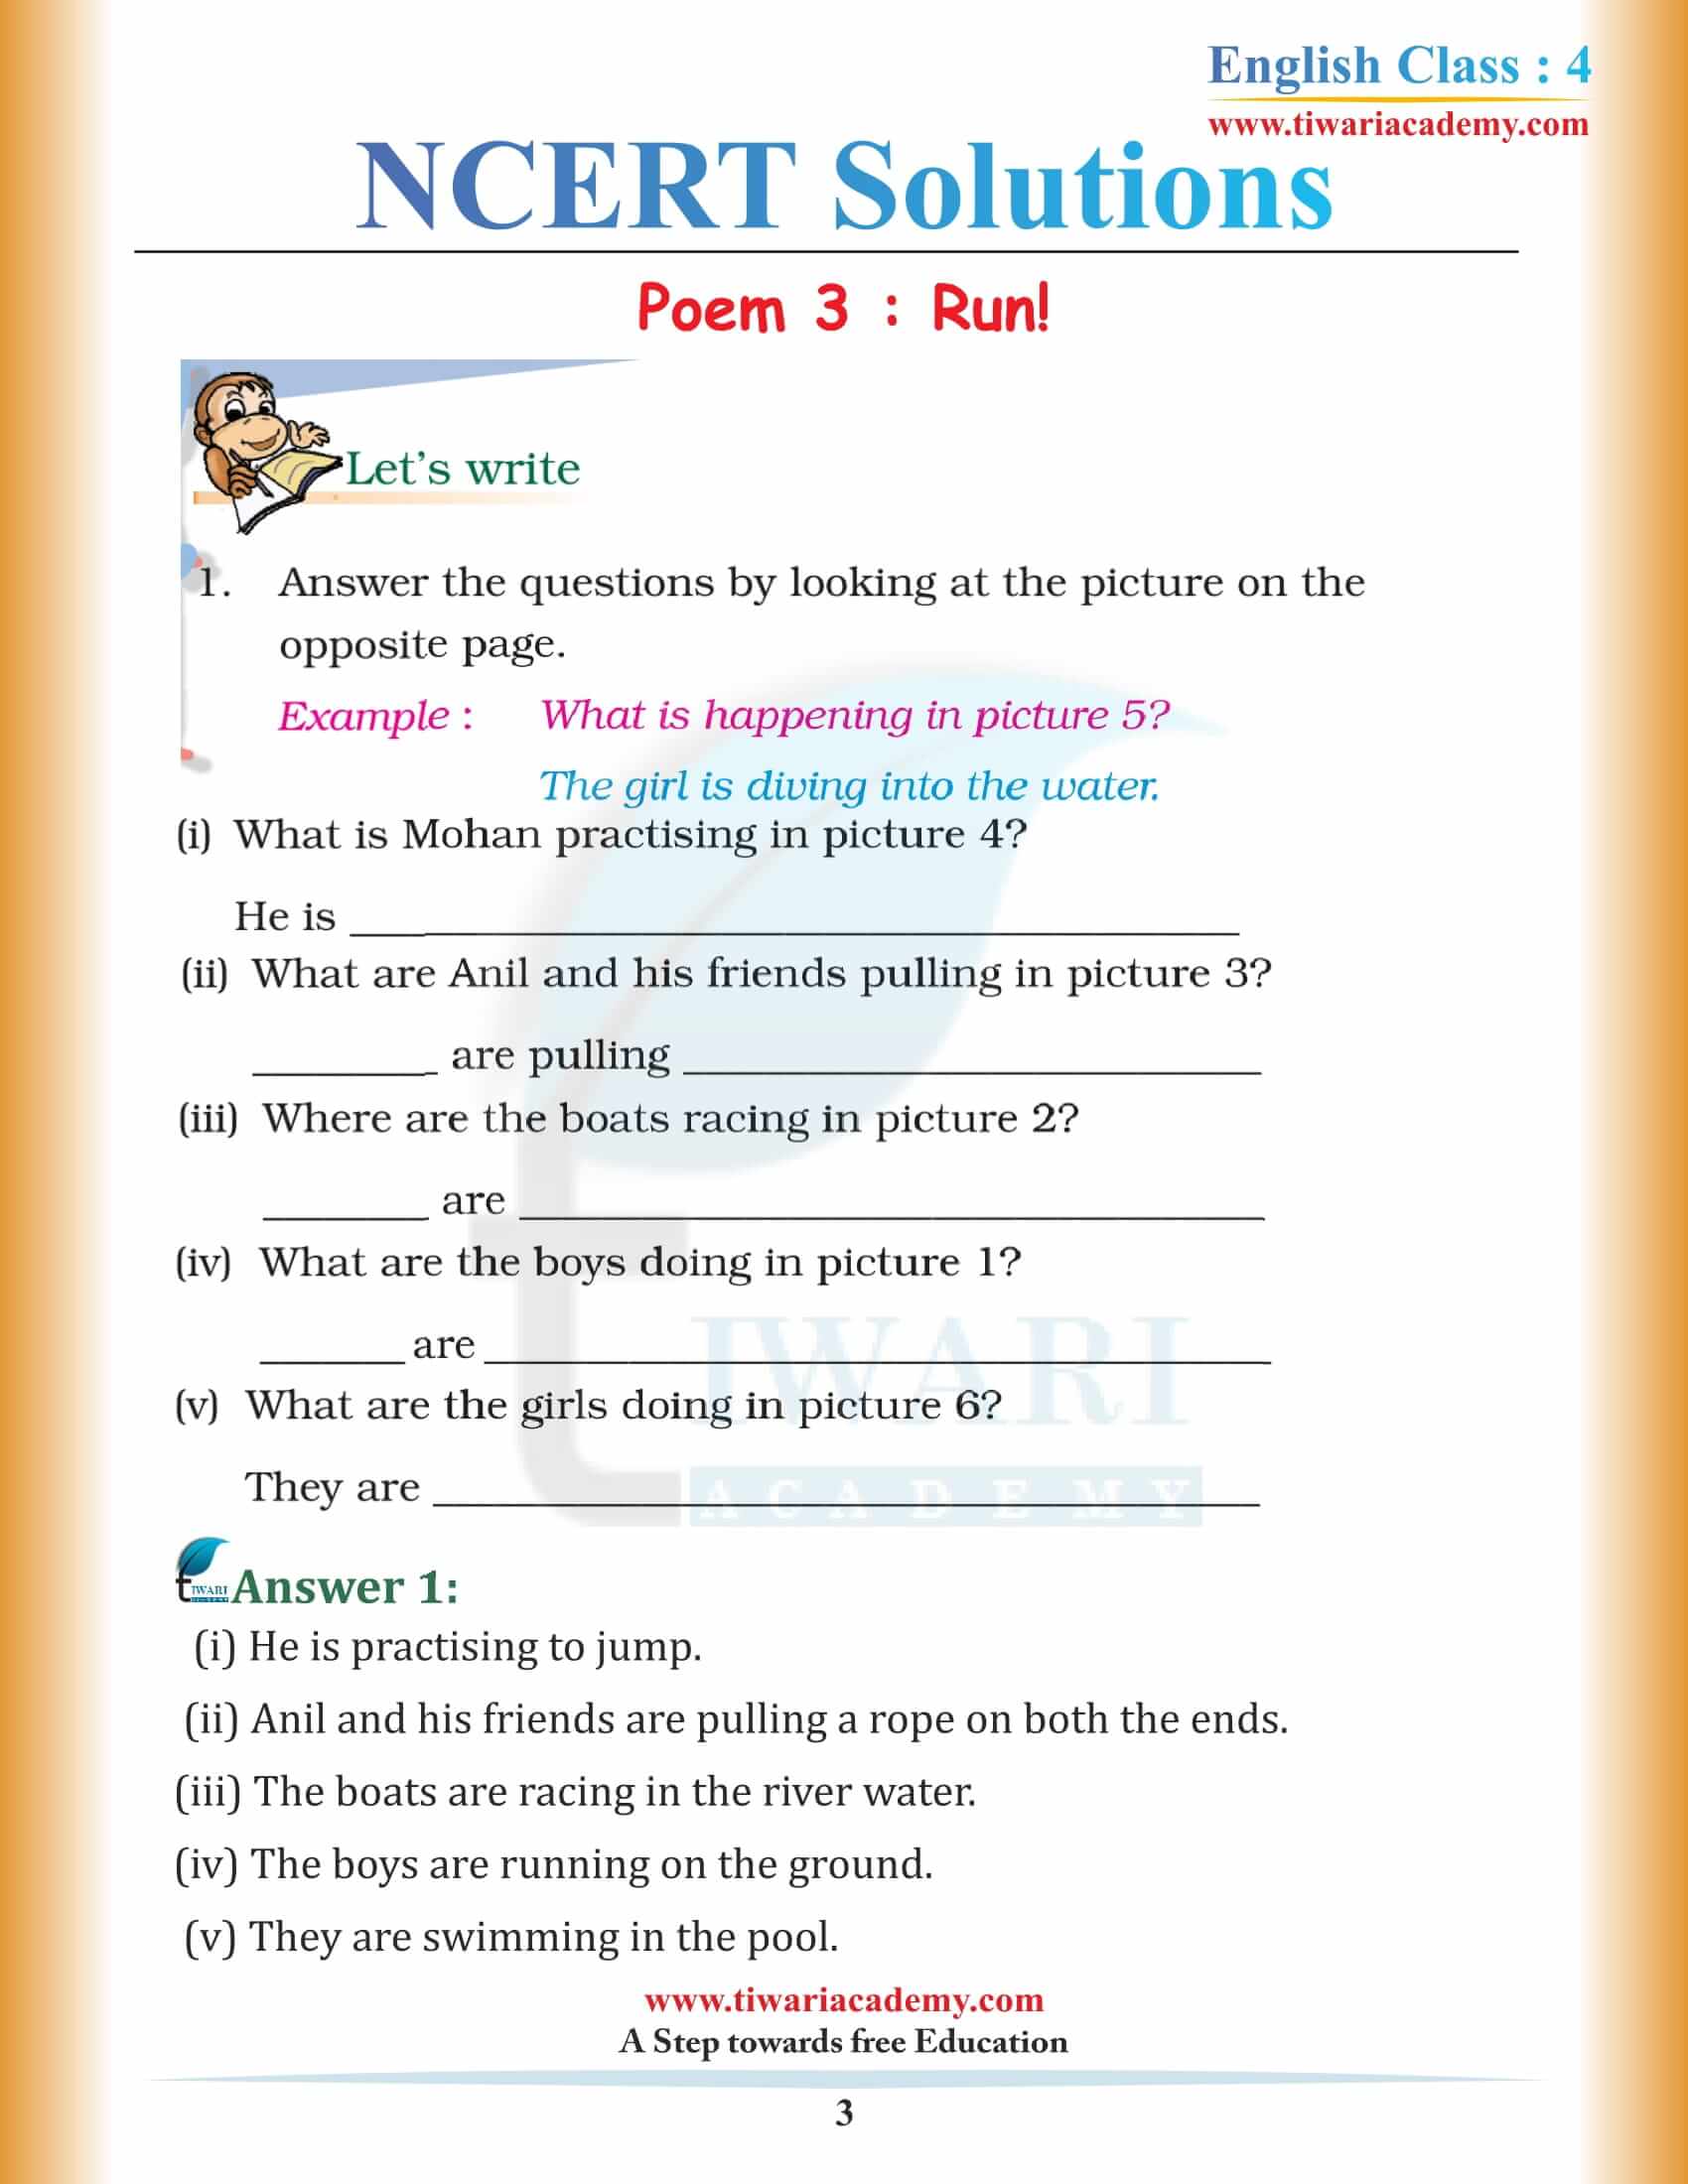 NCERT Solutions for Class 4 English Unit 3